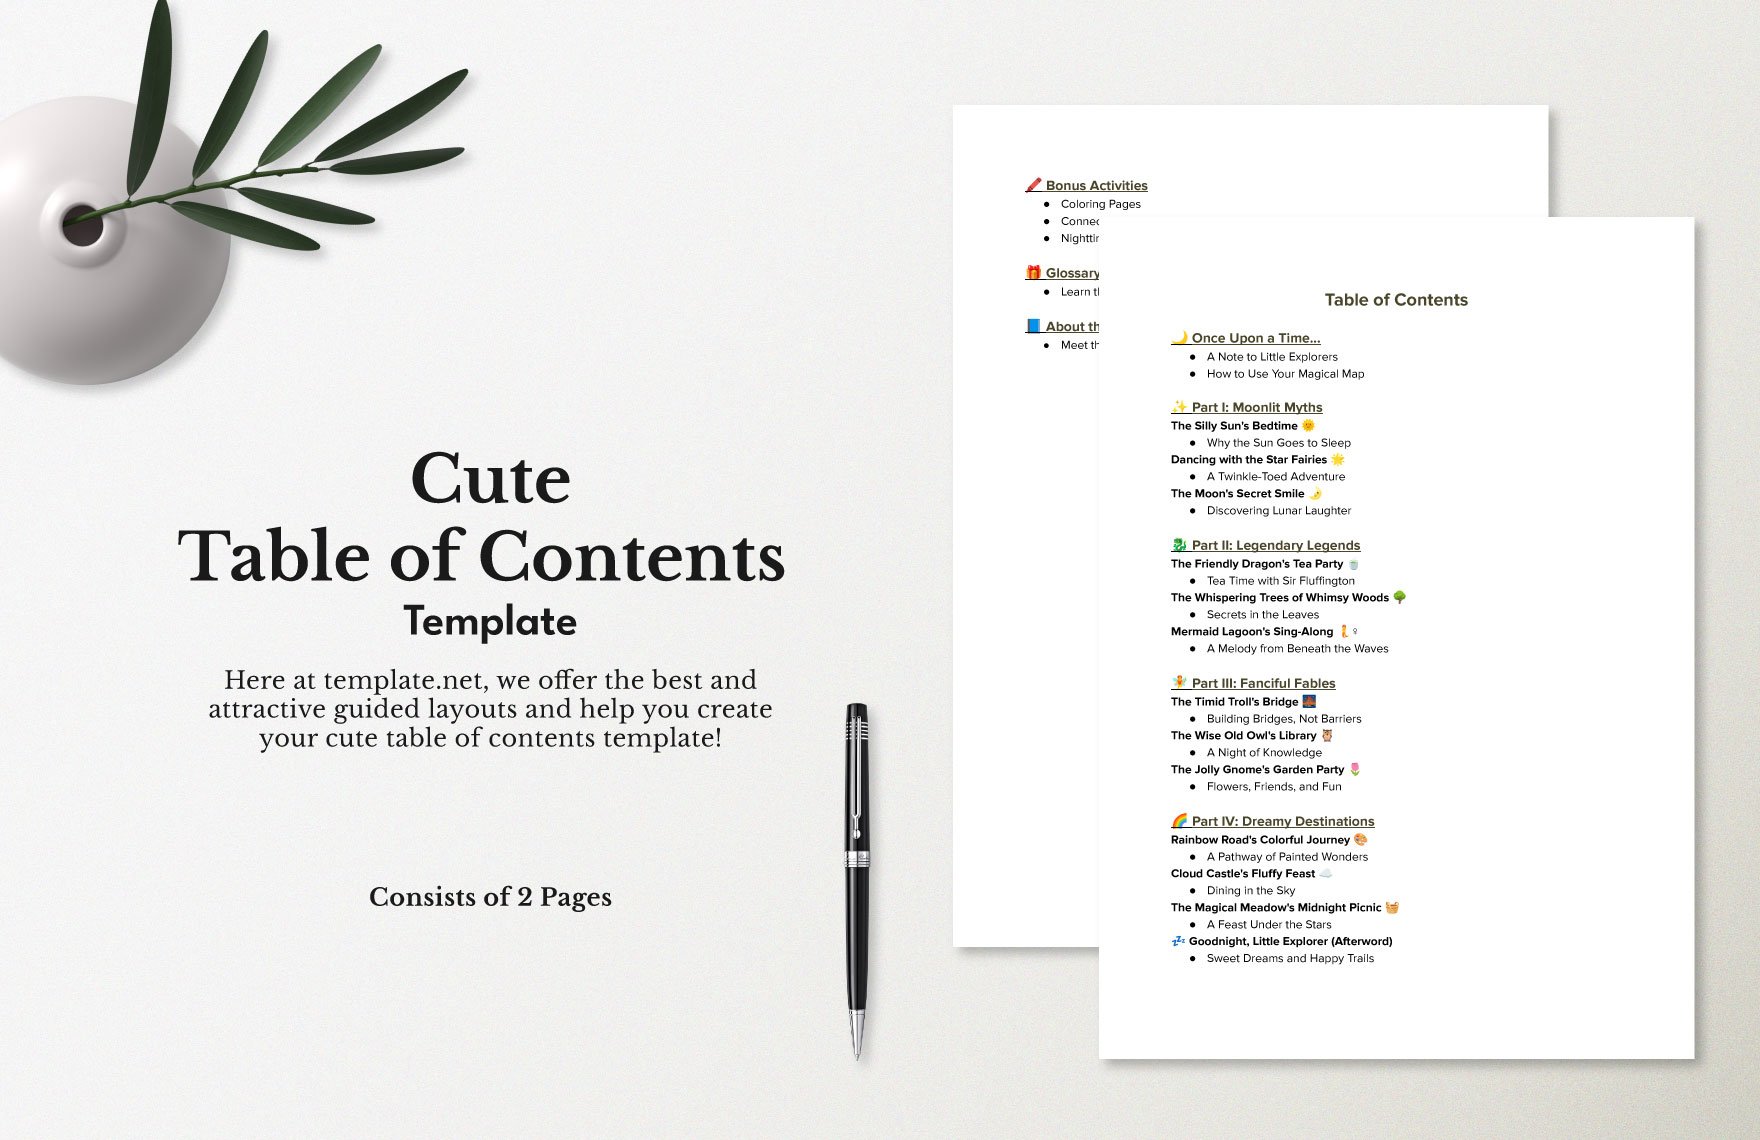 Free Cute Table of Contents Template